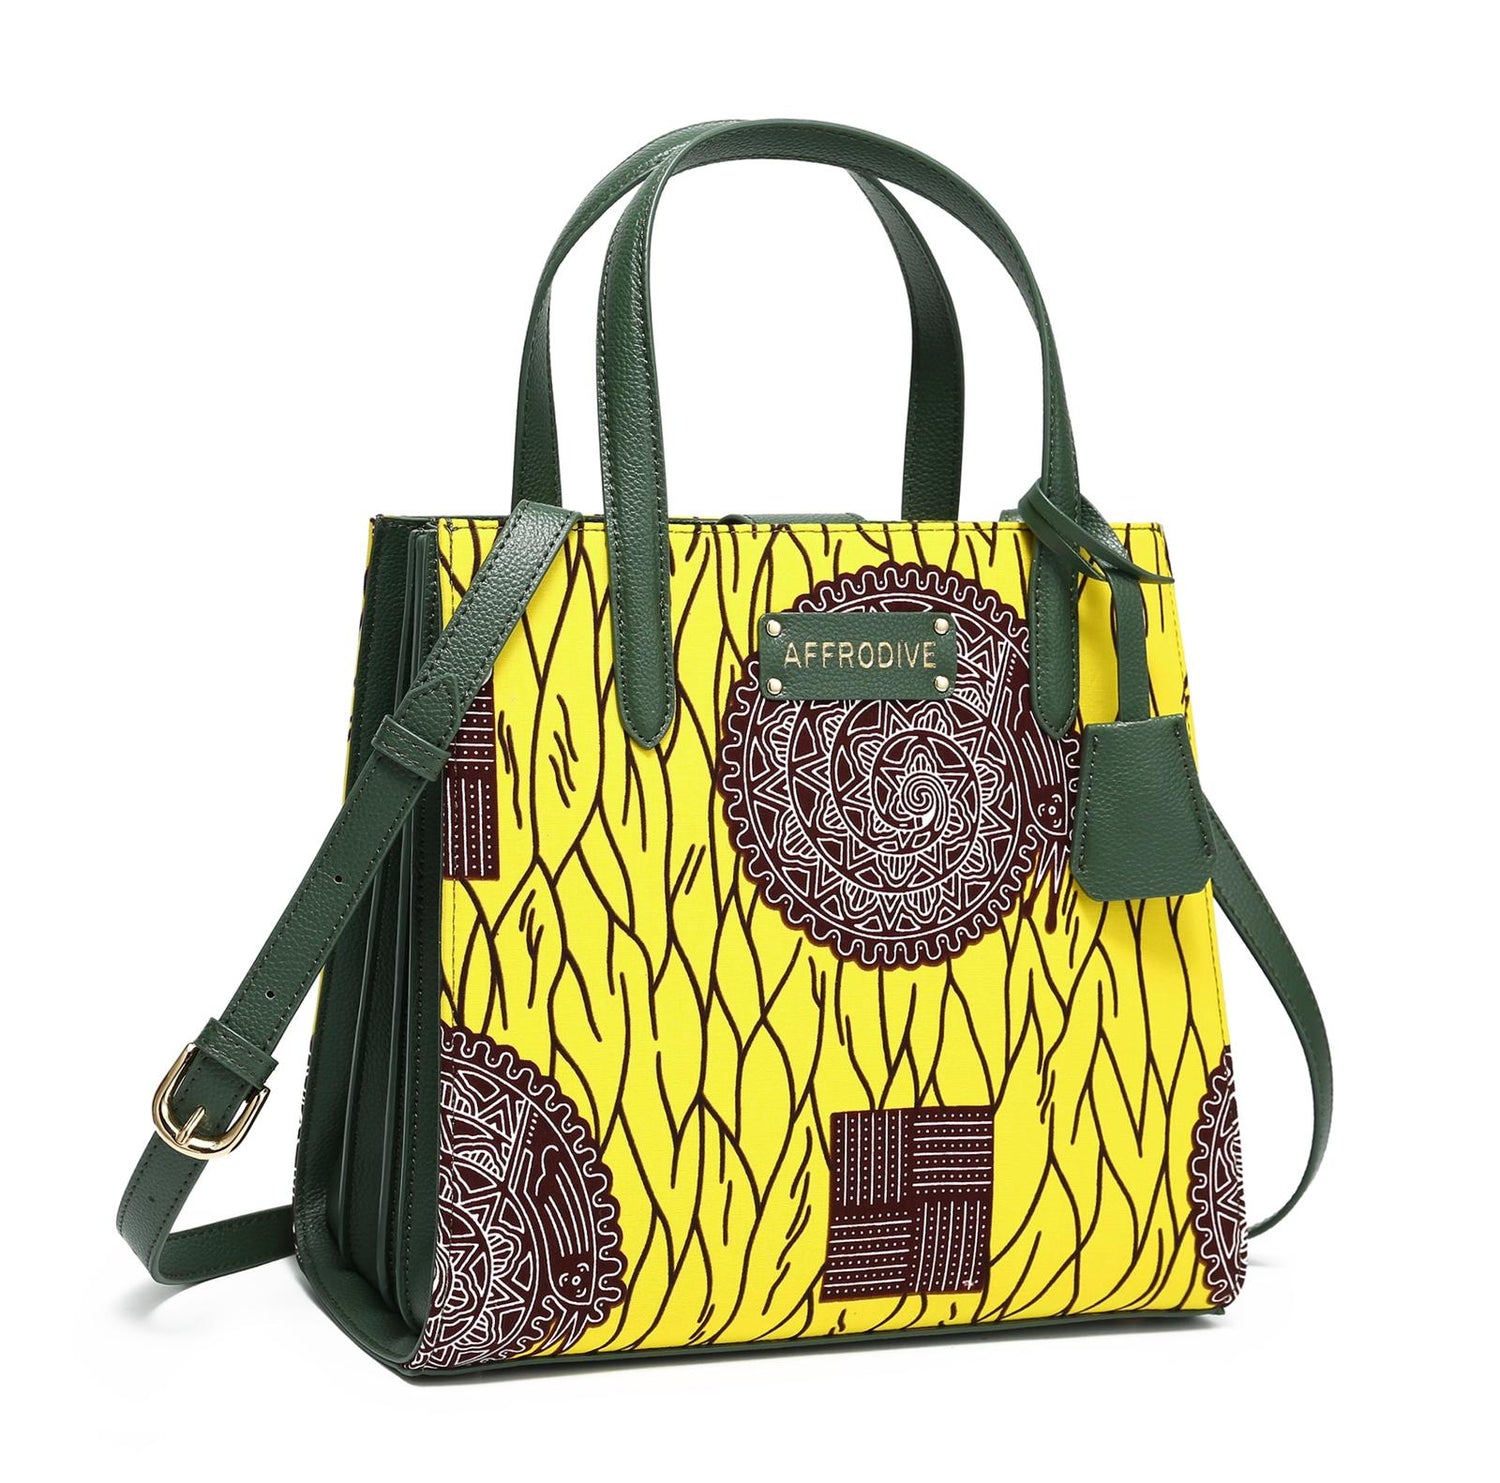 Yellow, Brown and White African Ankara Print And Leather Handbag, Green Leather Handle, zipper, Spacious Easy to Handle African Print Handbag